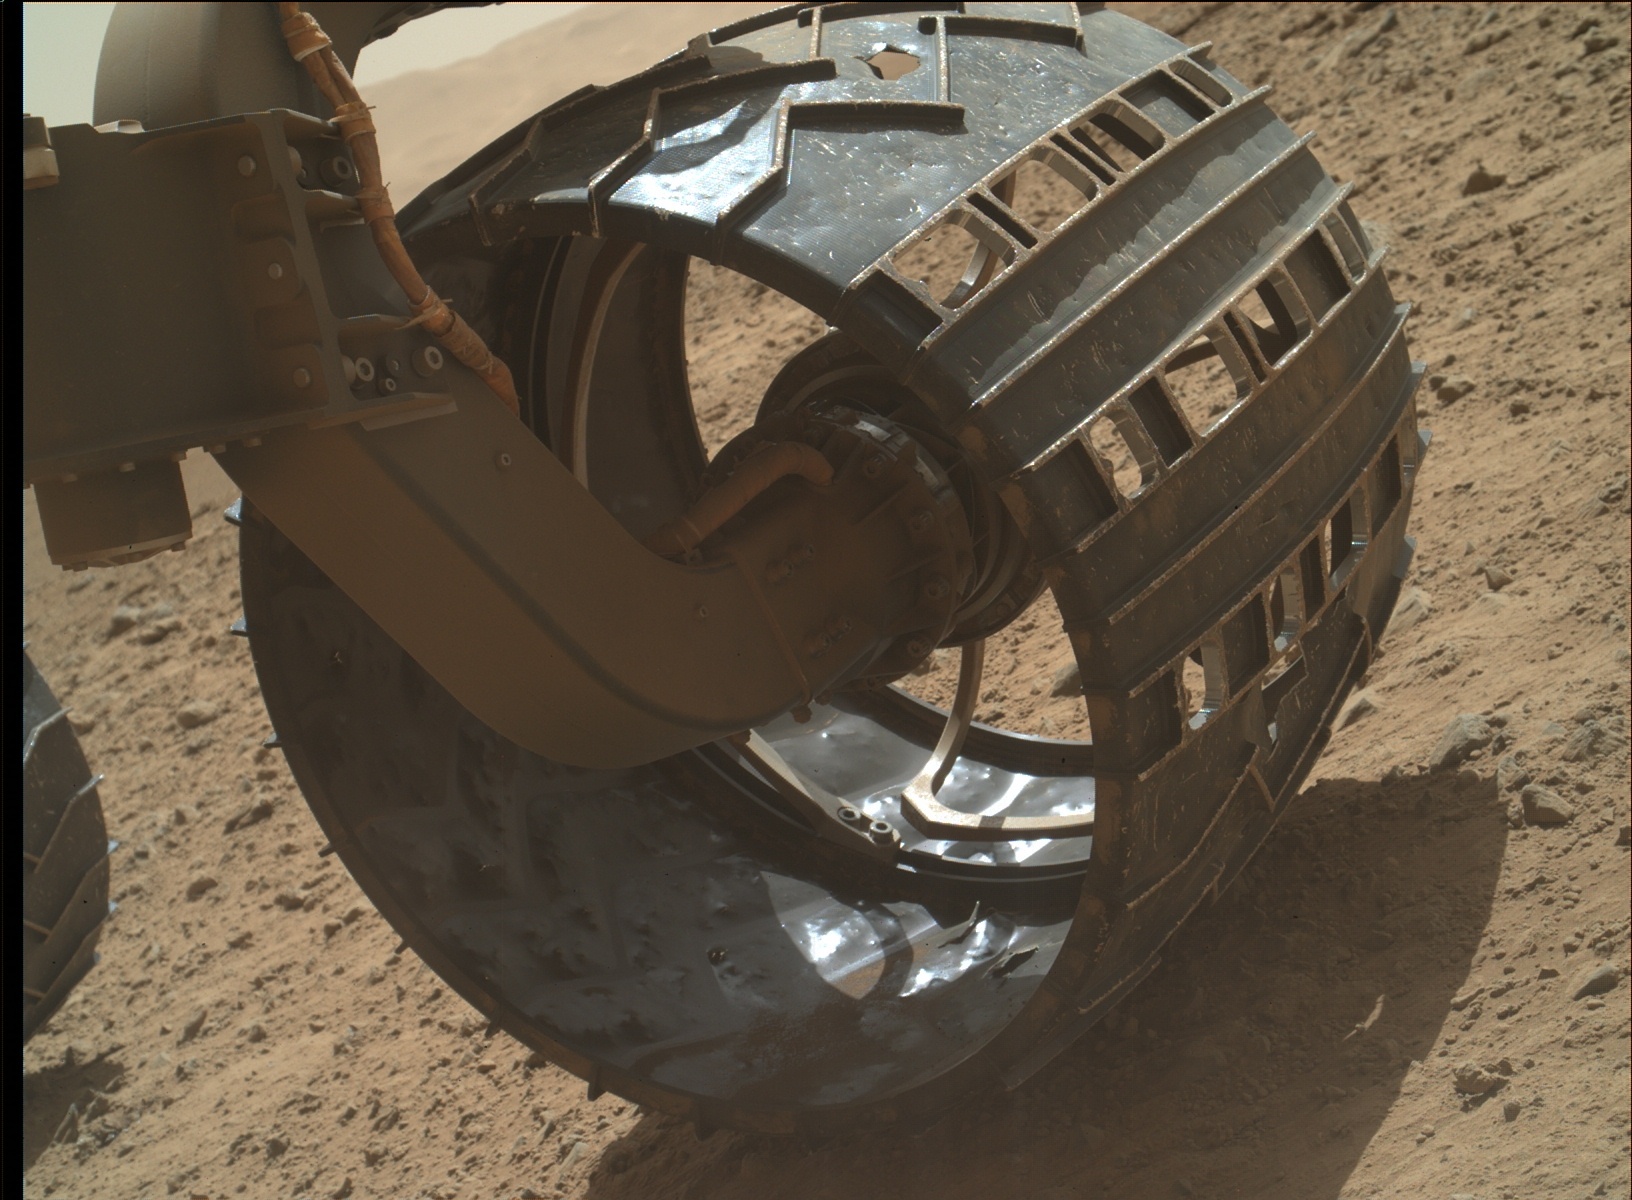 Nasa's Mars rover Curiosity acquired this image using its Mars Hand Lens Imager (MAHLI) on Sol 588